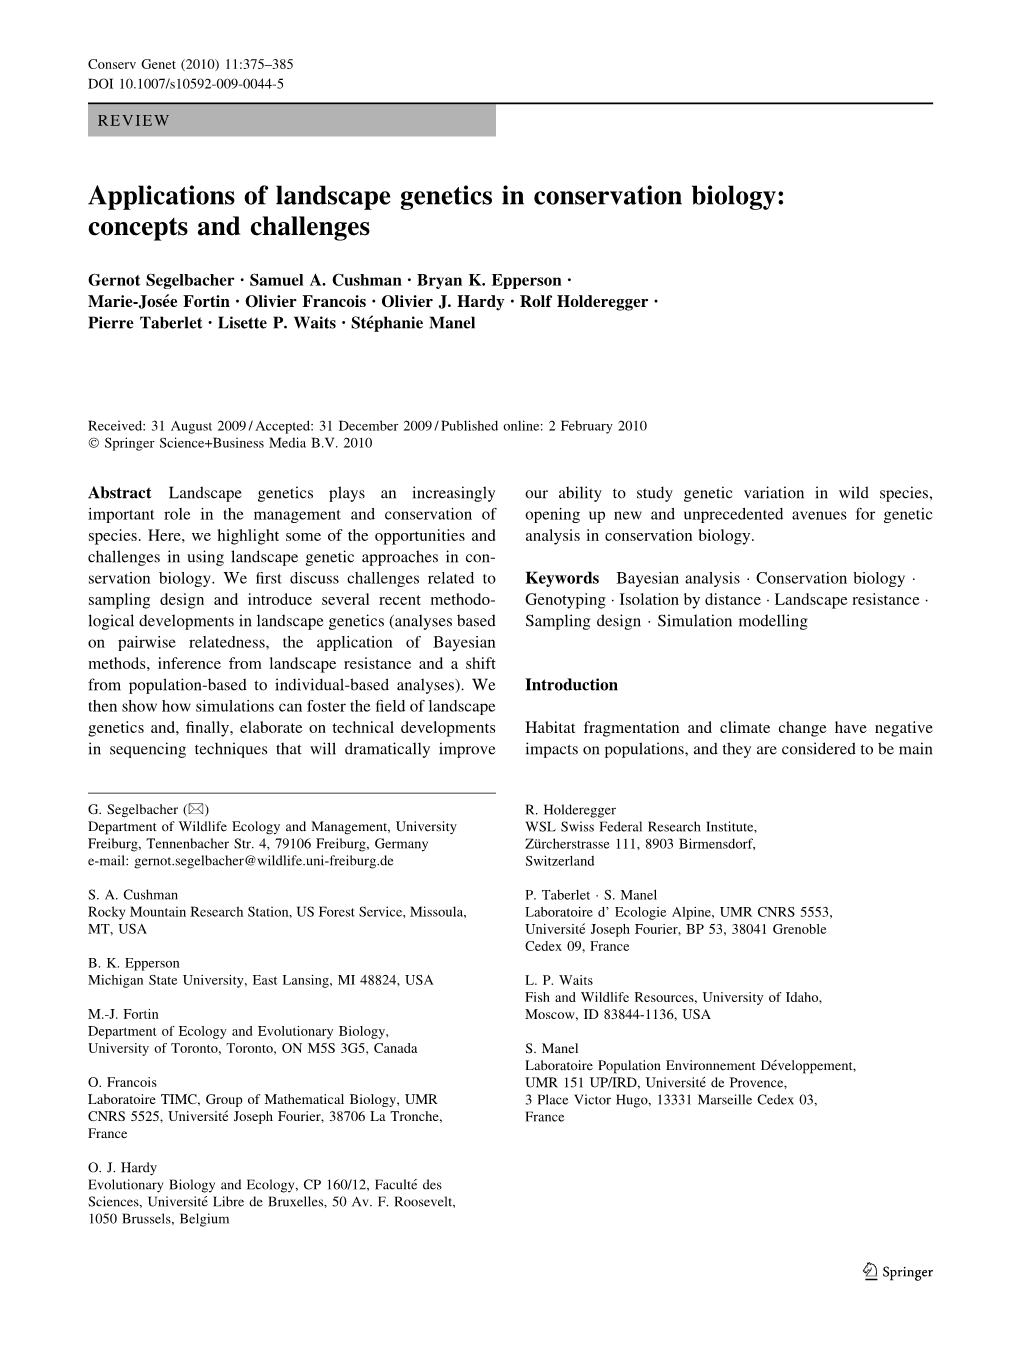 Applications of Landscape Genetics in Conservation Biology: Concepts and Challenges